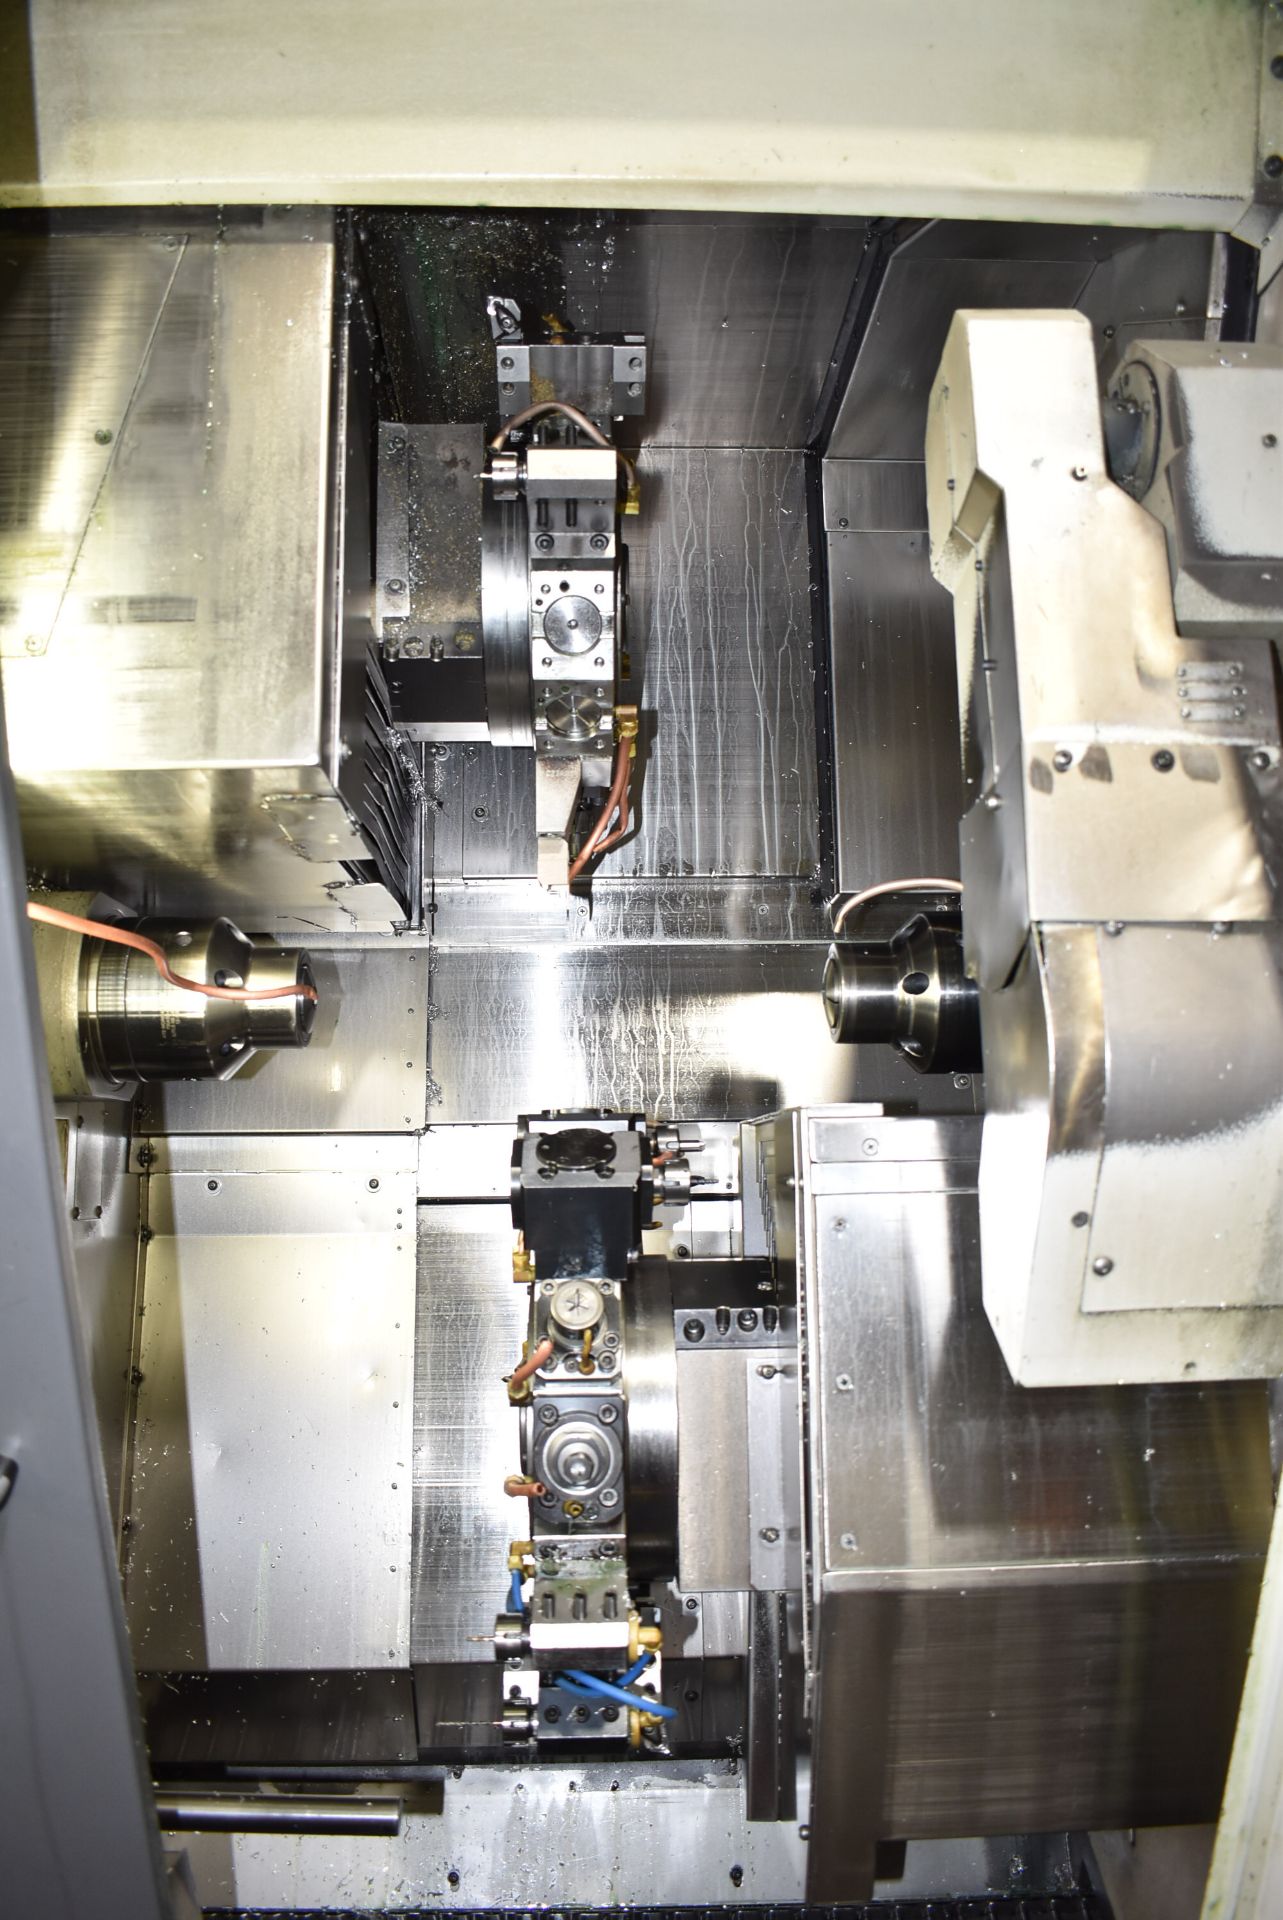 NAKAMURA-TOME WT-100 MULTI-AXIS OPPOSED SPINDLE AND TWIN TURRET CNC MULTI-TASKING CENTER WITH - Image 2 of 17